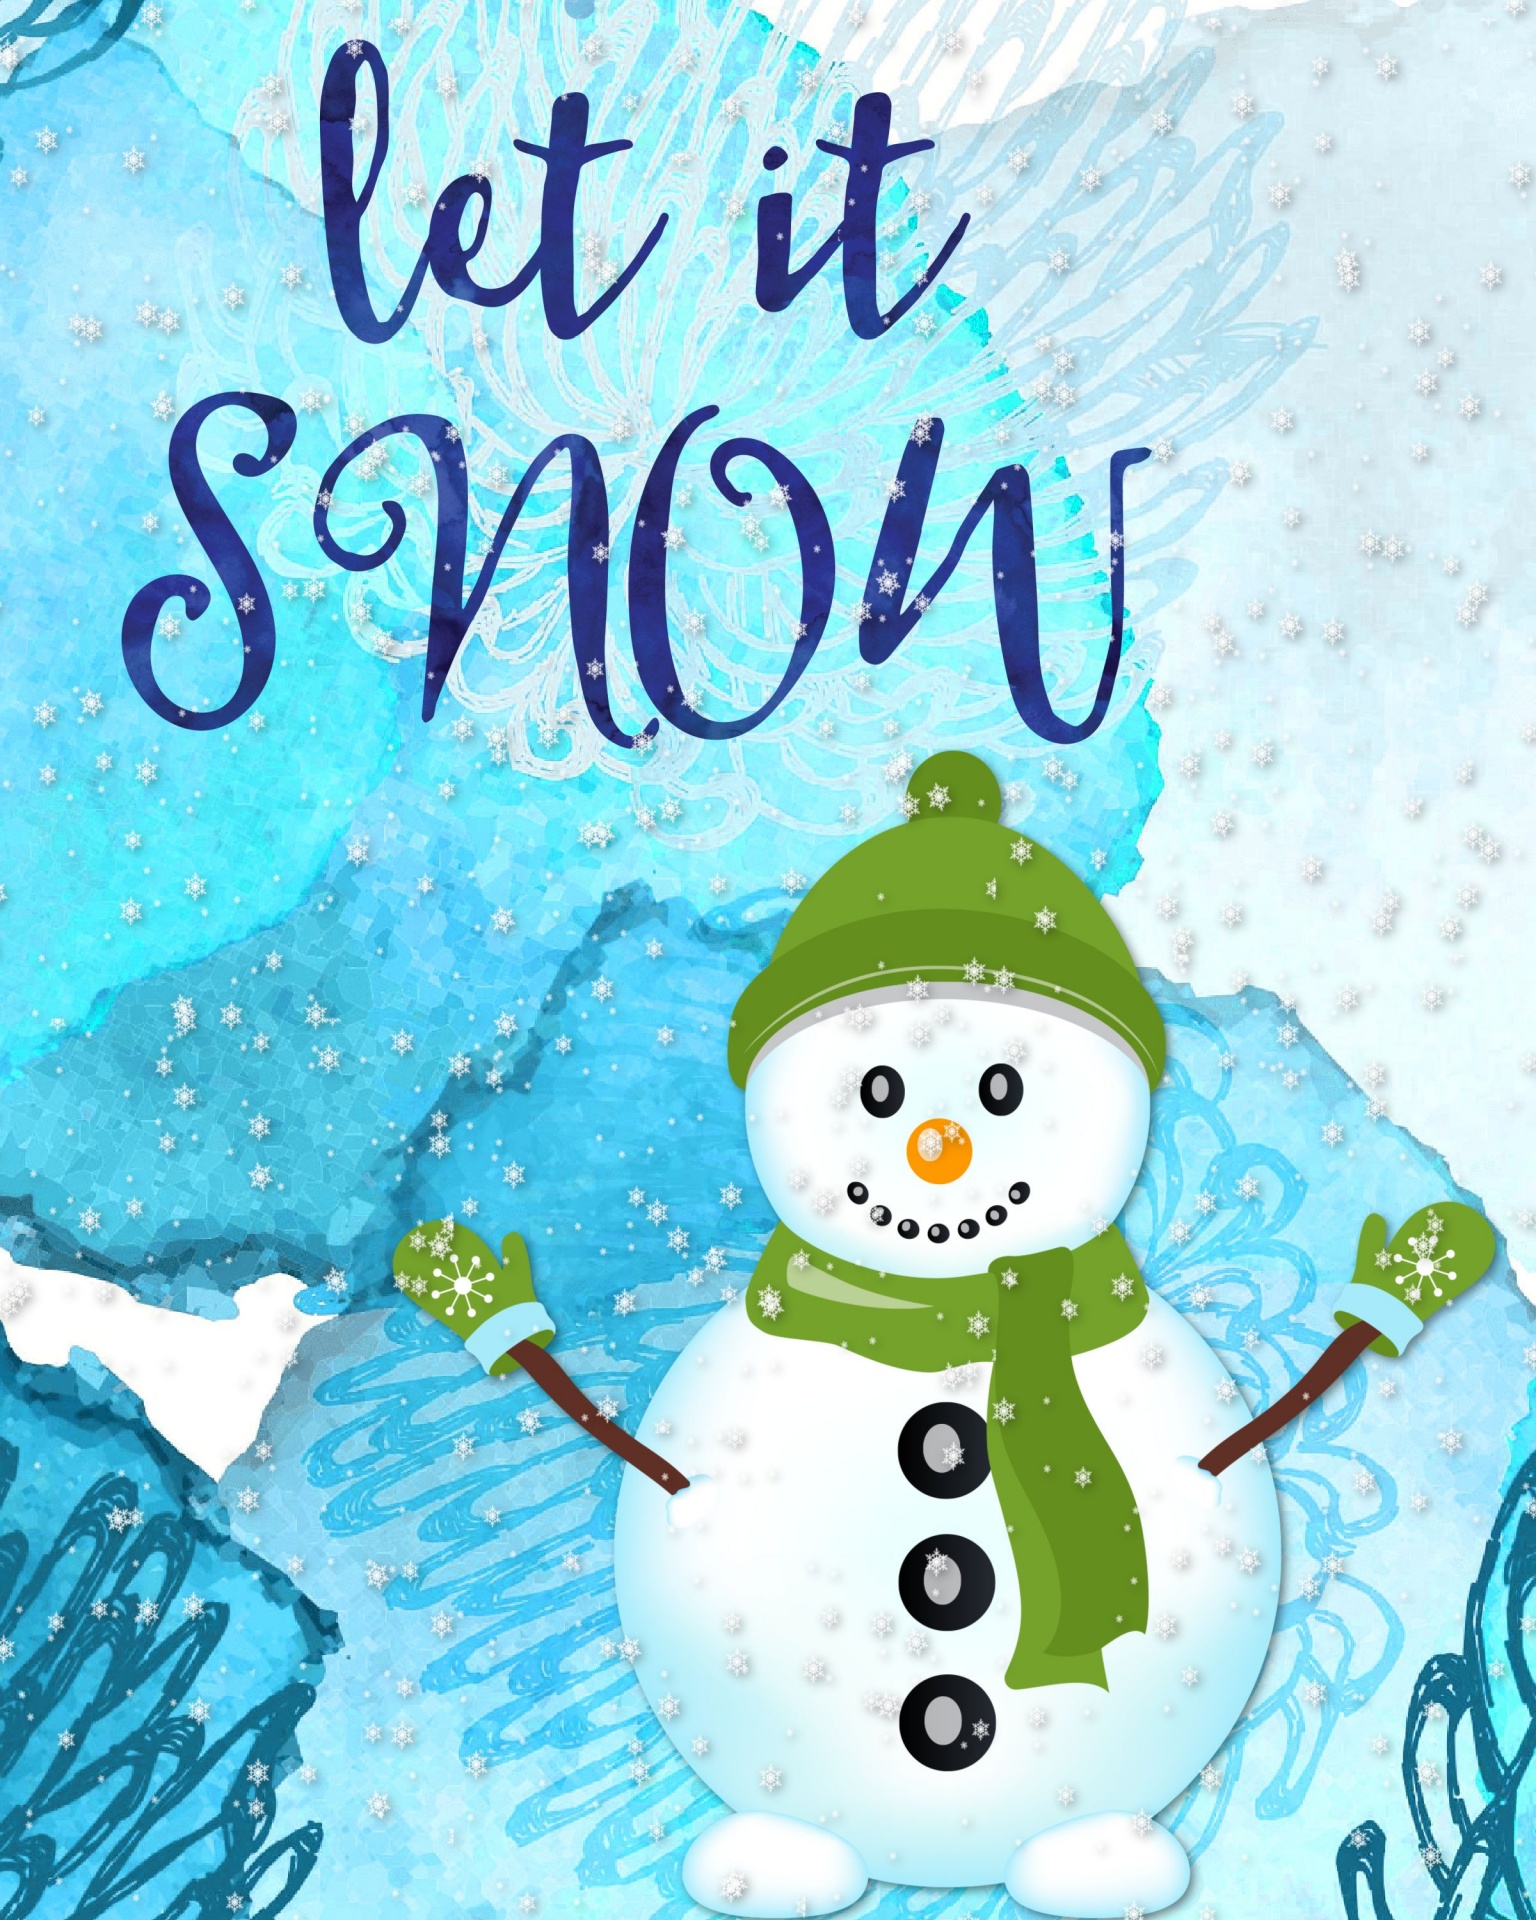 cute snowman illustration on an abstract winter background with snow